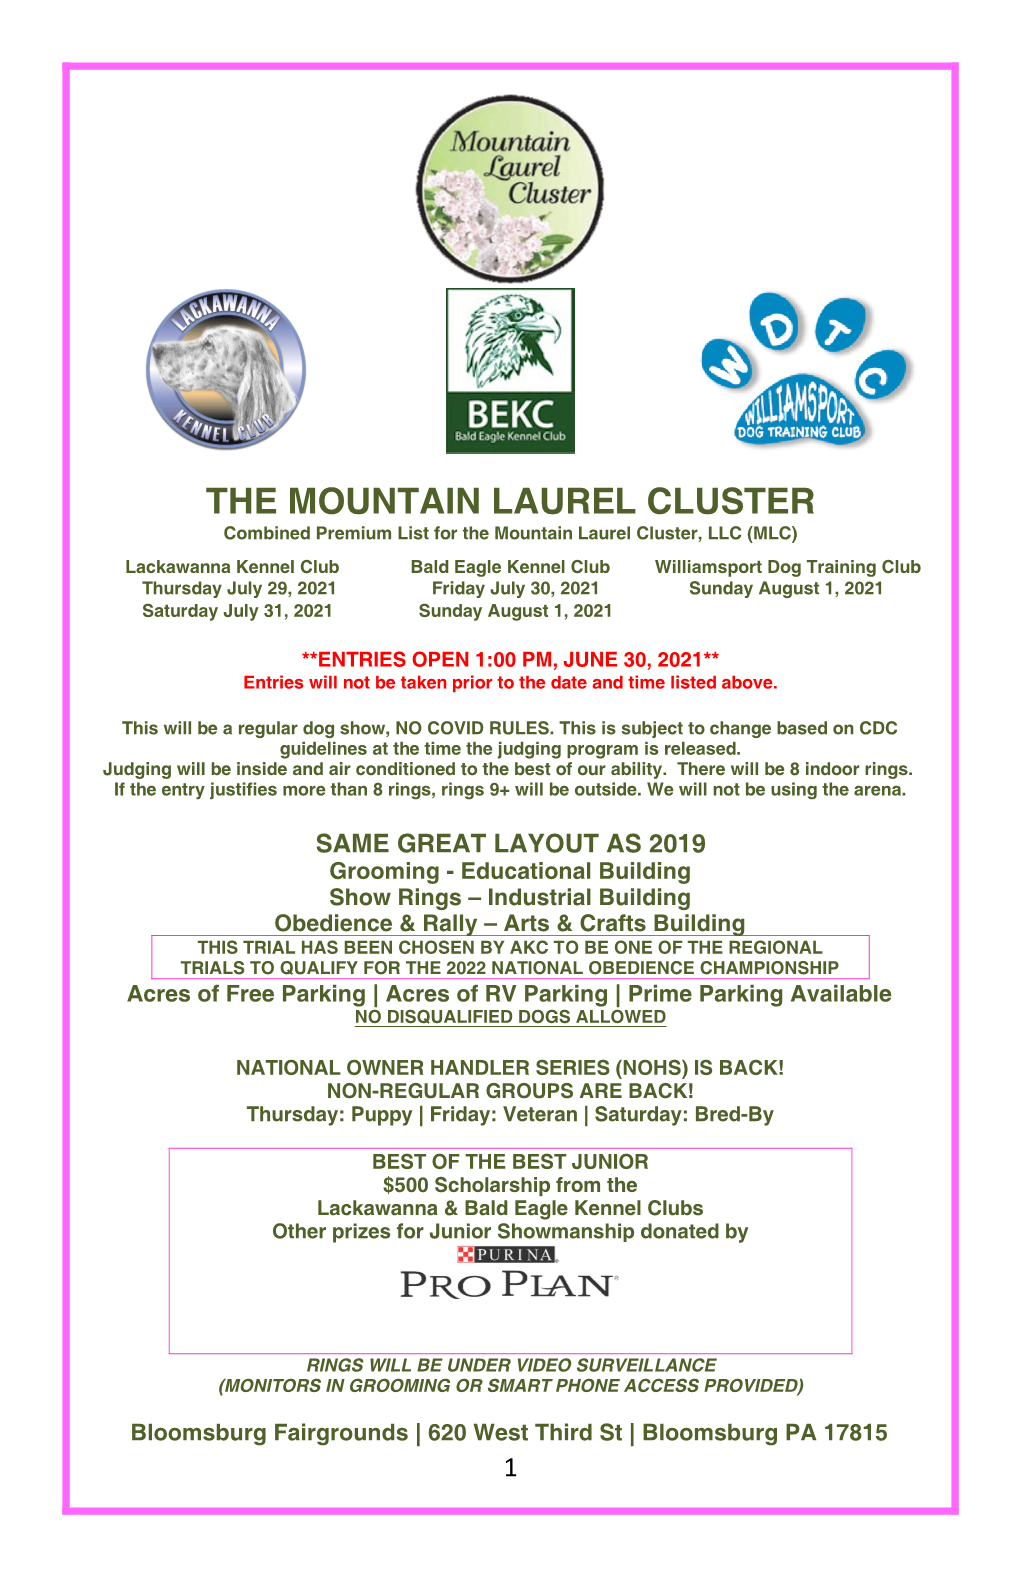 The Mountain Laurel Cluster